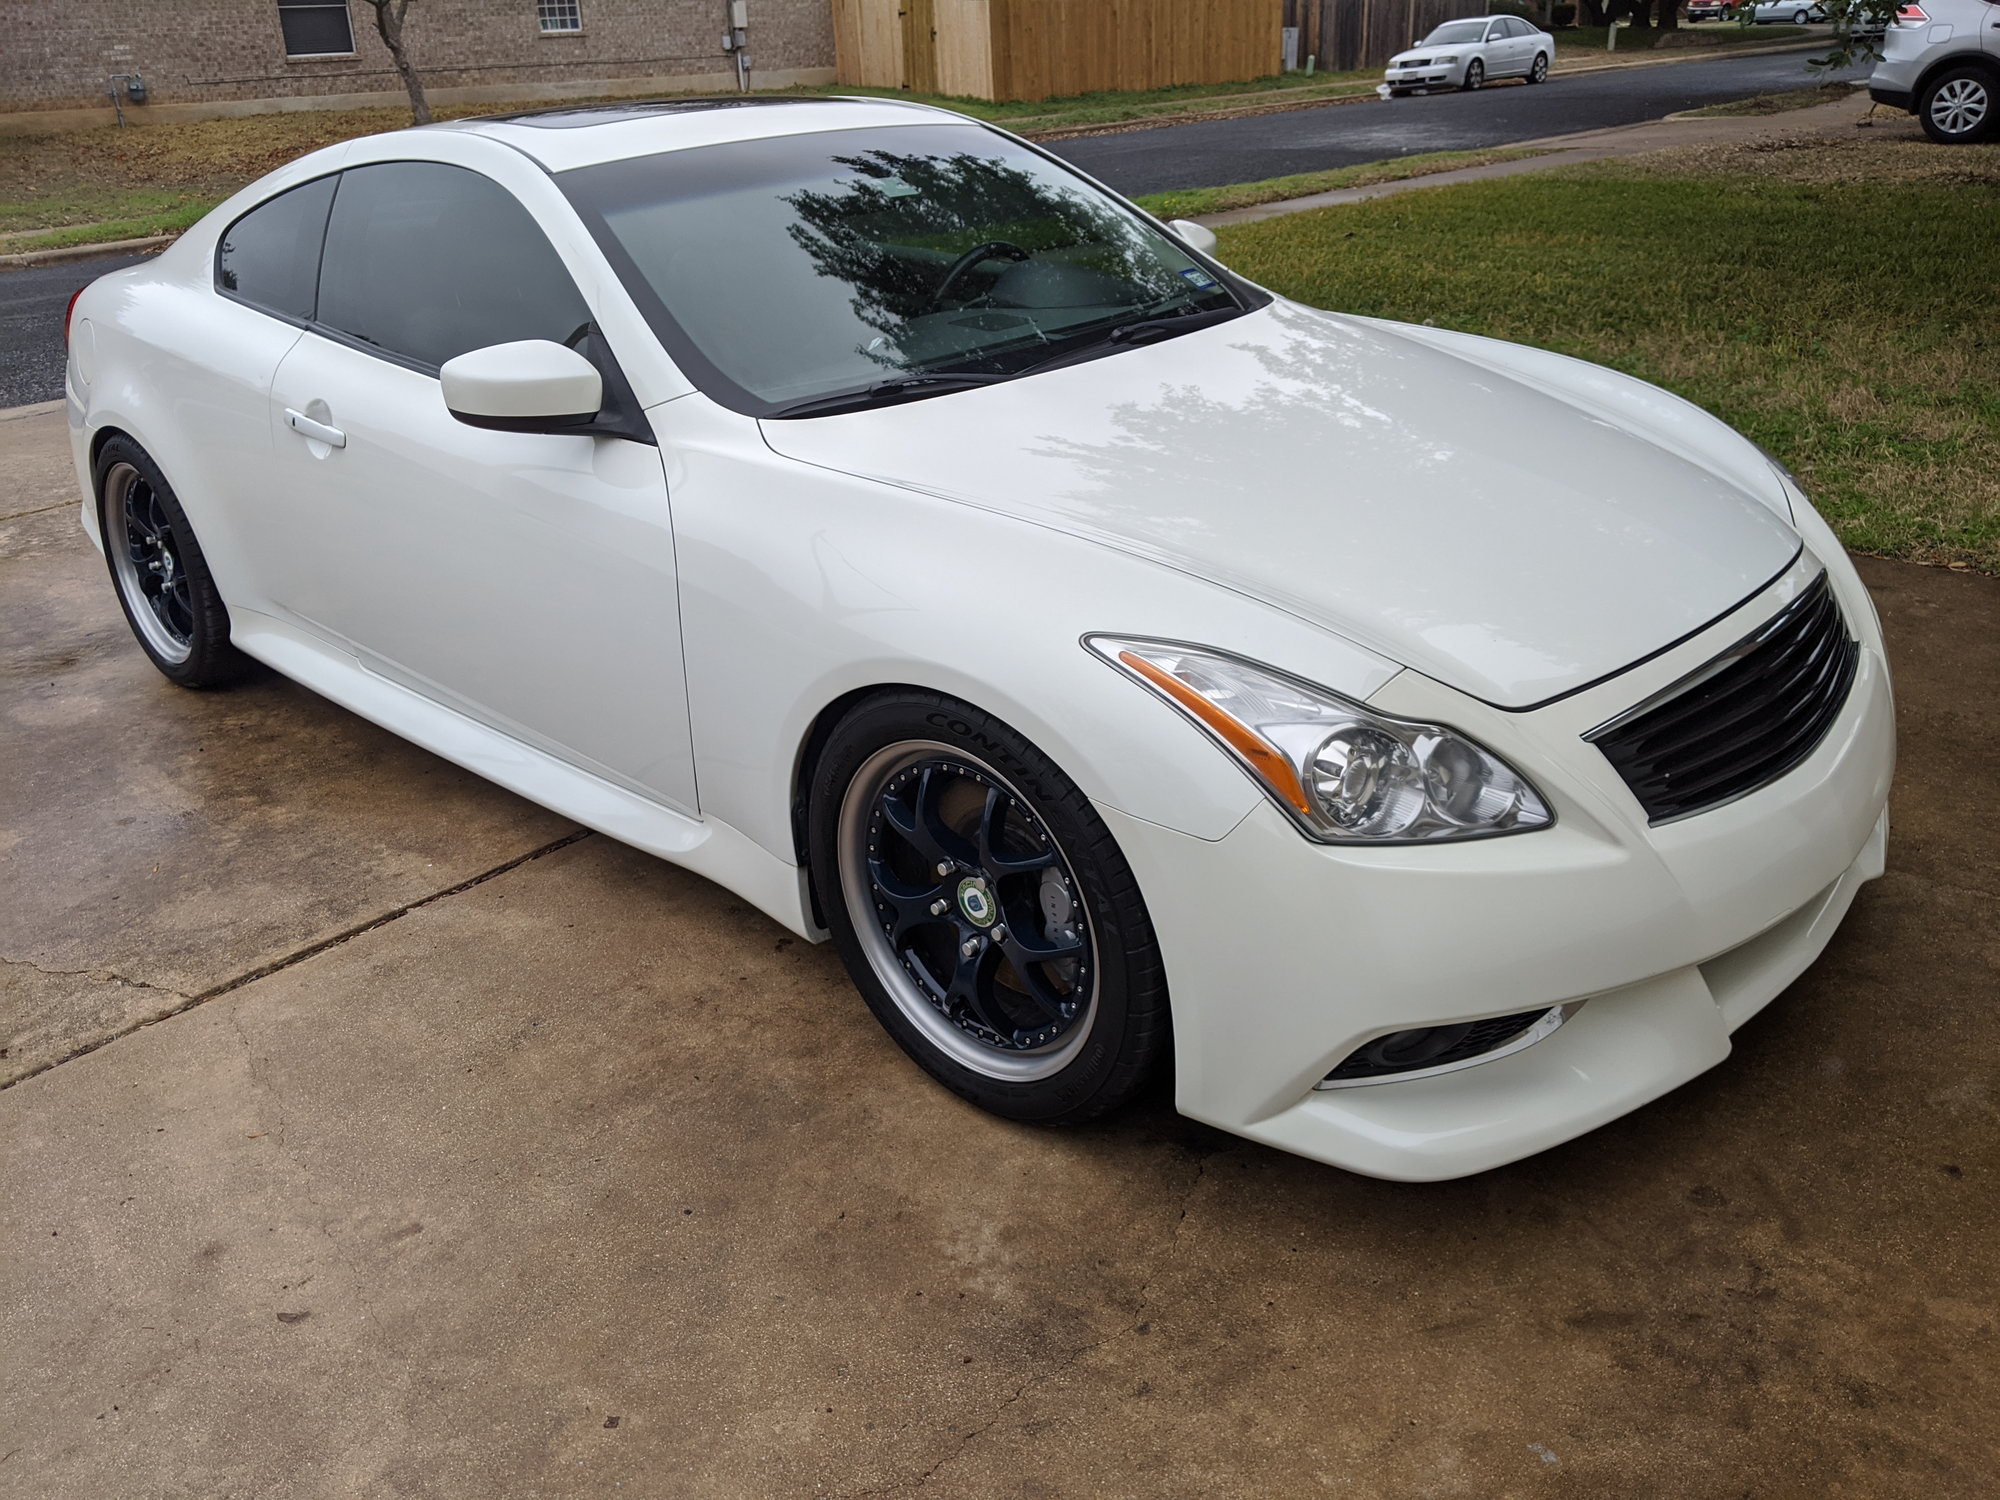 For Sale 2008 Infiniti G37s 6spd w/ mods and low miles - MyG37